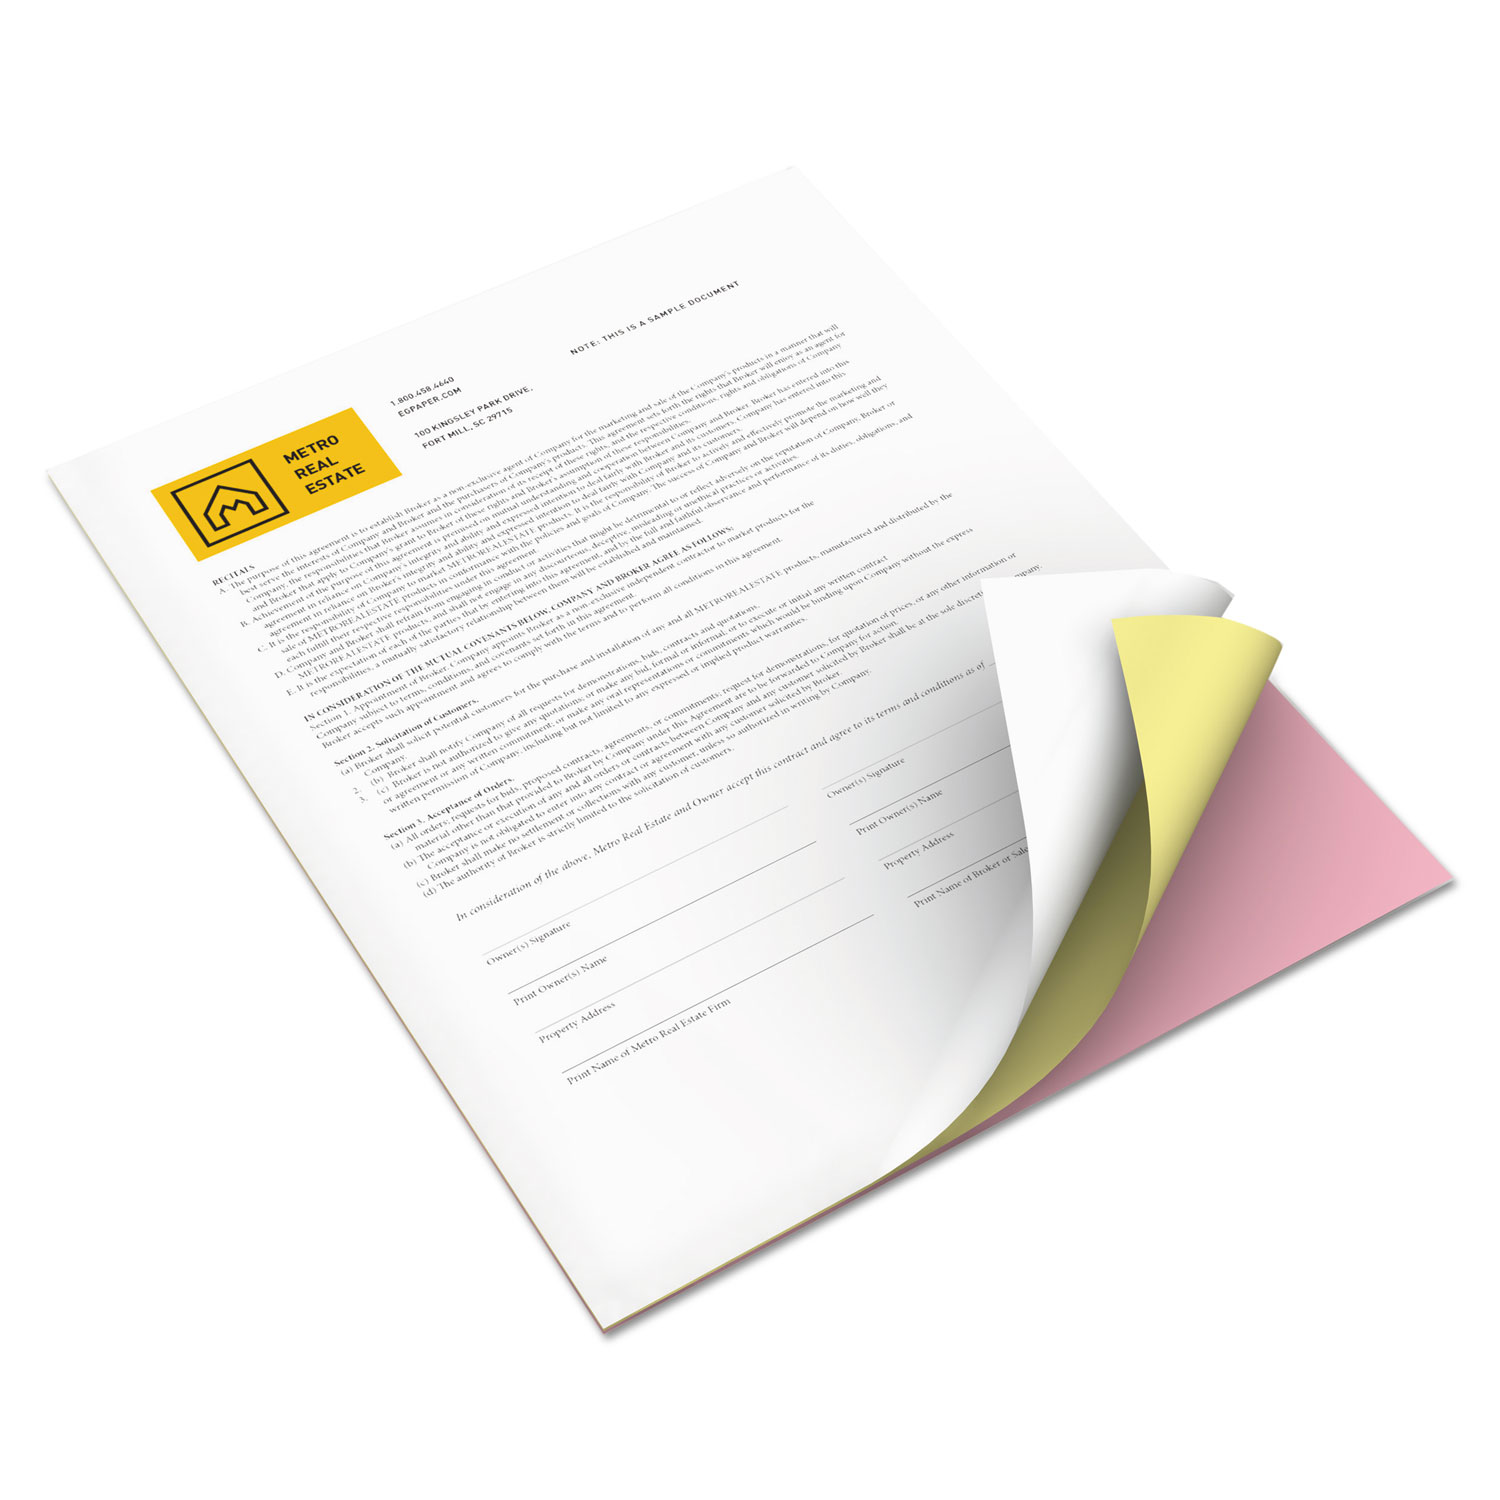 Revolution Carbonless 3-Part Paper, 8.5 x 11, Pink/Canary/White, 5, 010/Carton